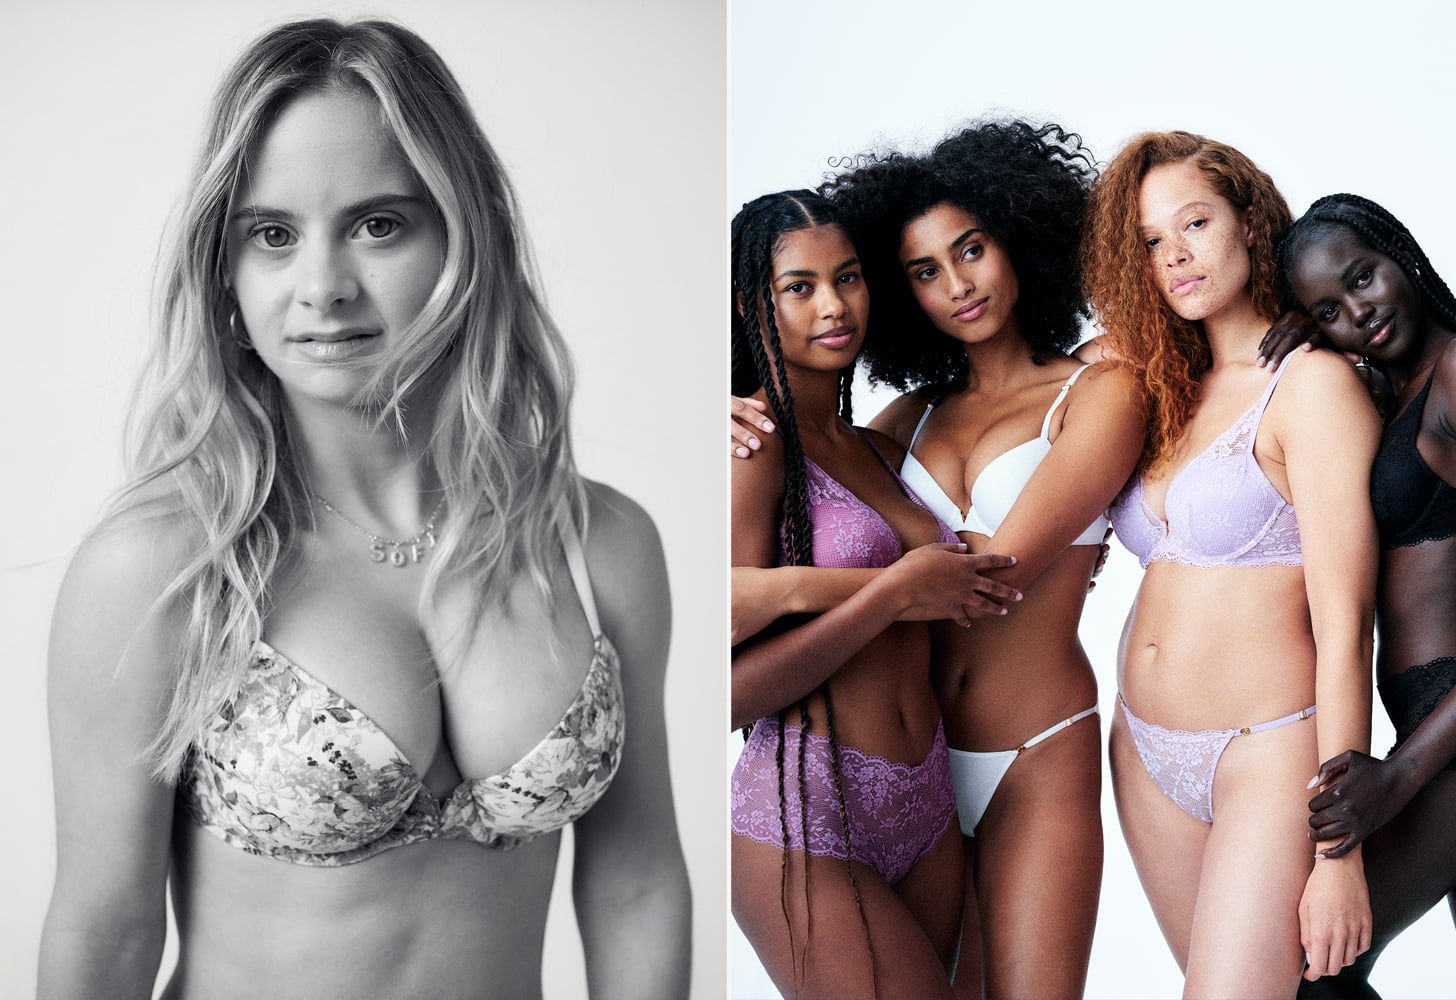 Victoria's Secret first model with Down syndrome is Latina Sofía Jirau